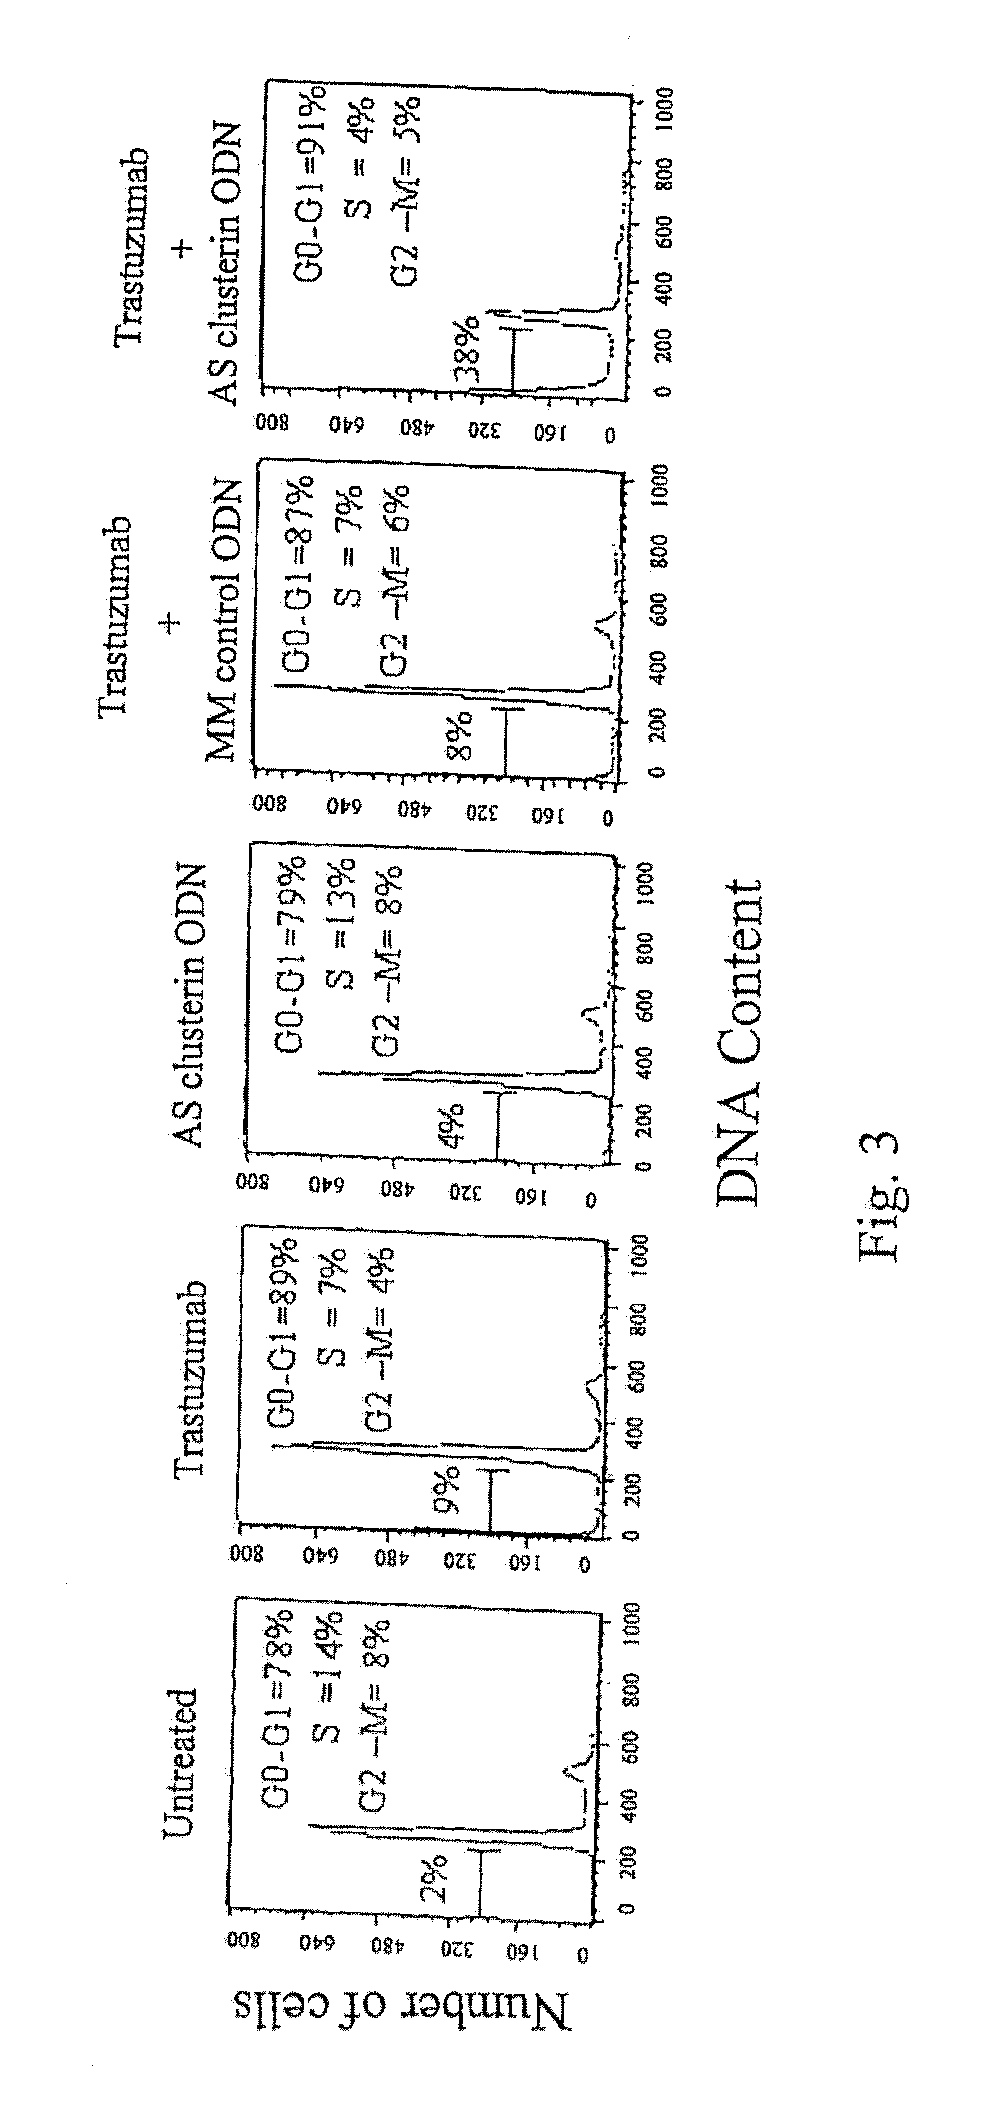 Treatment of cancer with a combination of an agent that perturbs the egf signaling pathway and an oligonucleotide that reduces clusterin levels